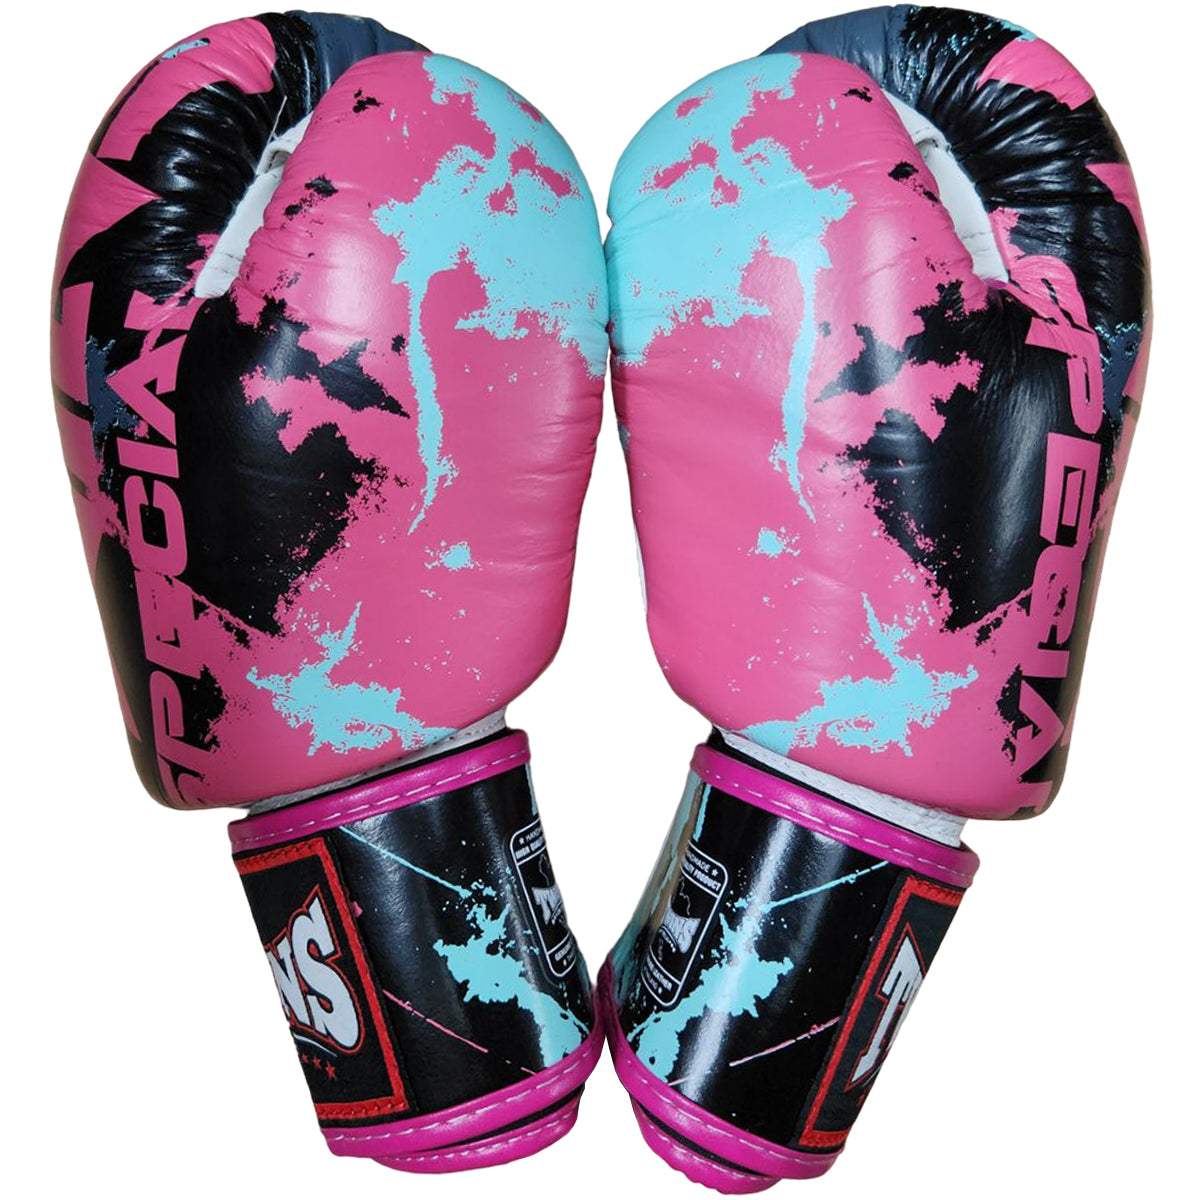 Boxing Gloves Twins Special FBGV-61 Candy Fancy